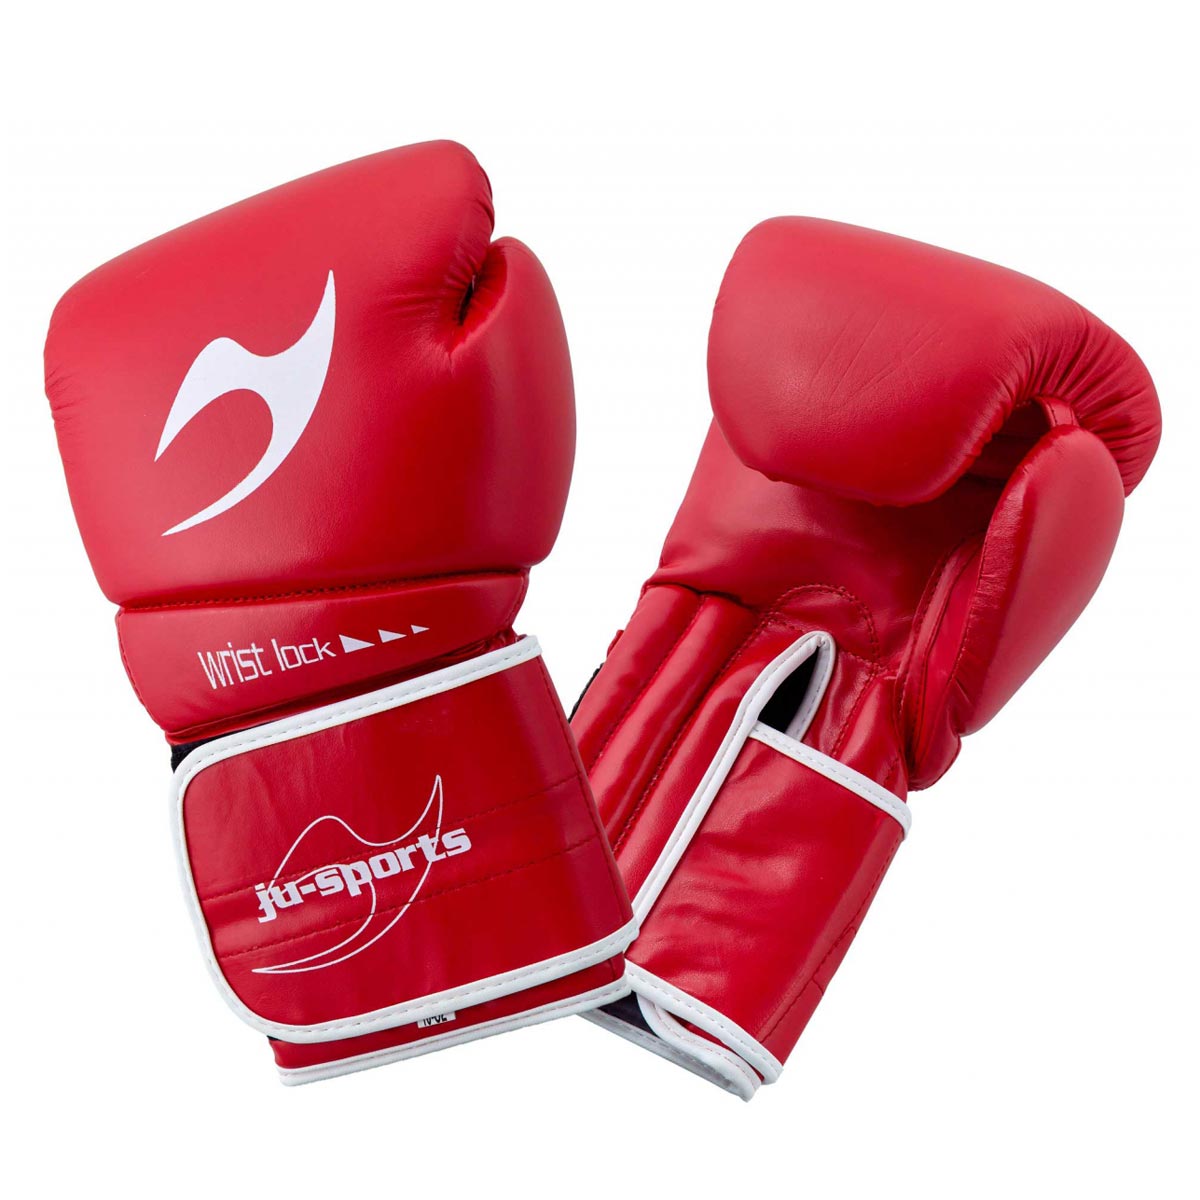 ju- Sports C16 Competitor Pro Boxing Gloves Leather 10 Oz Re-AFR_000764_H2